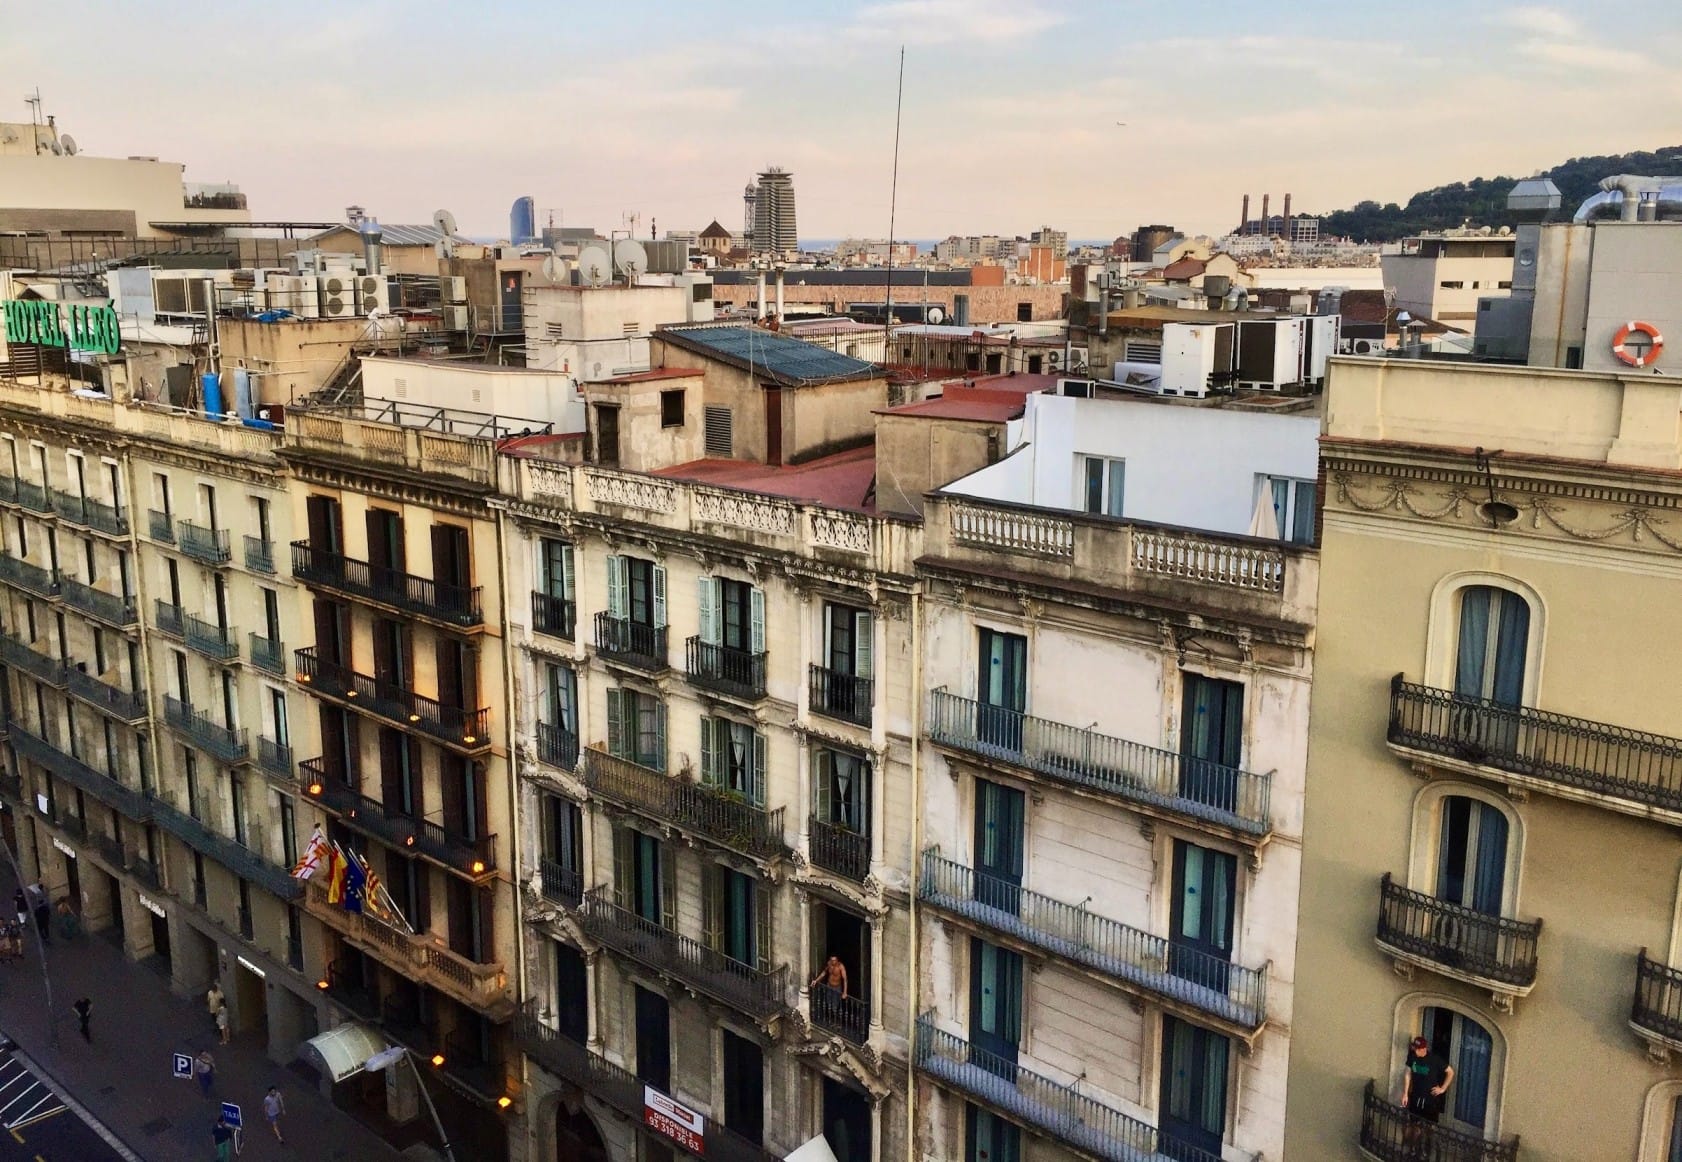 🇪🇸 How to Apply for the Spain Digital Nomad Visa